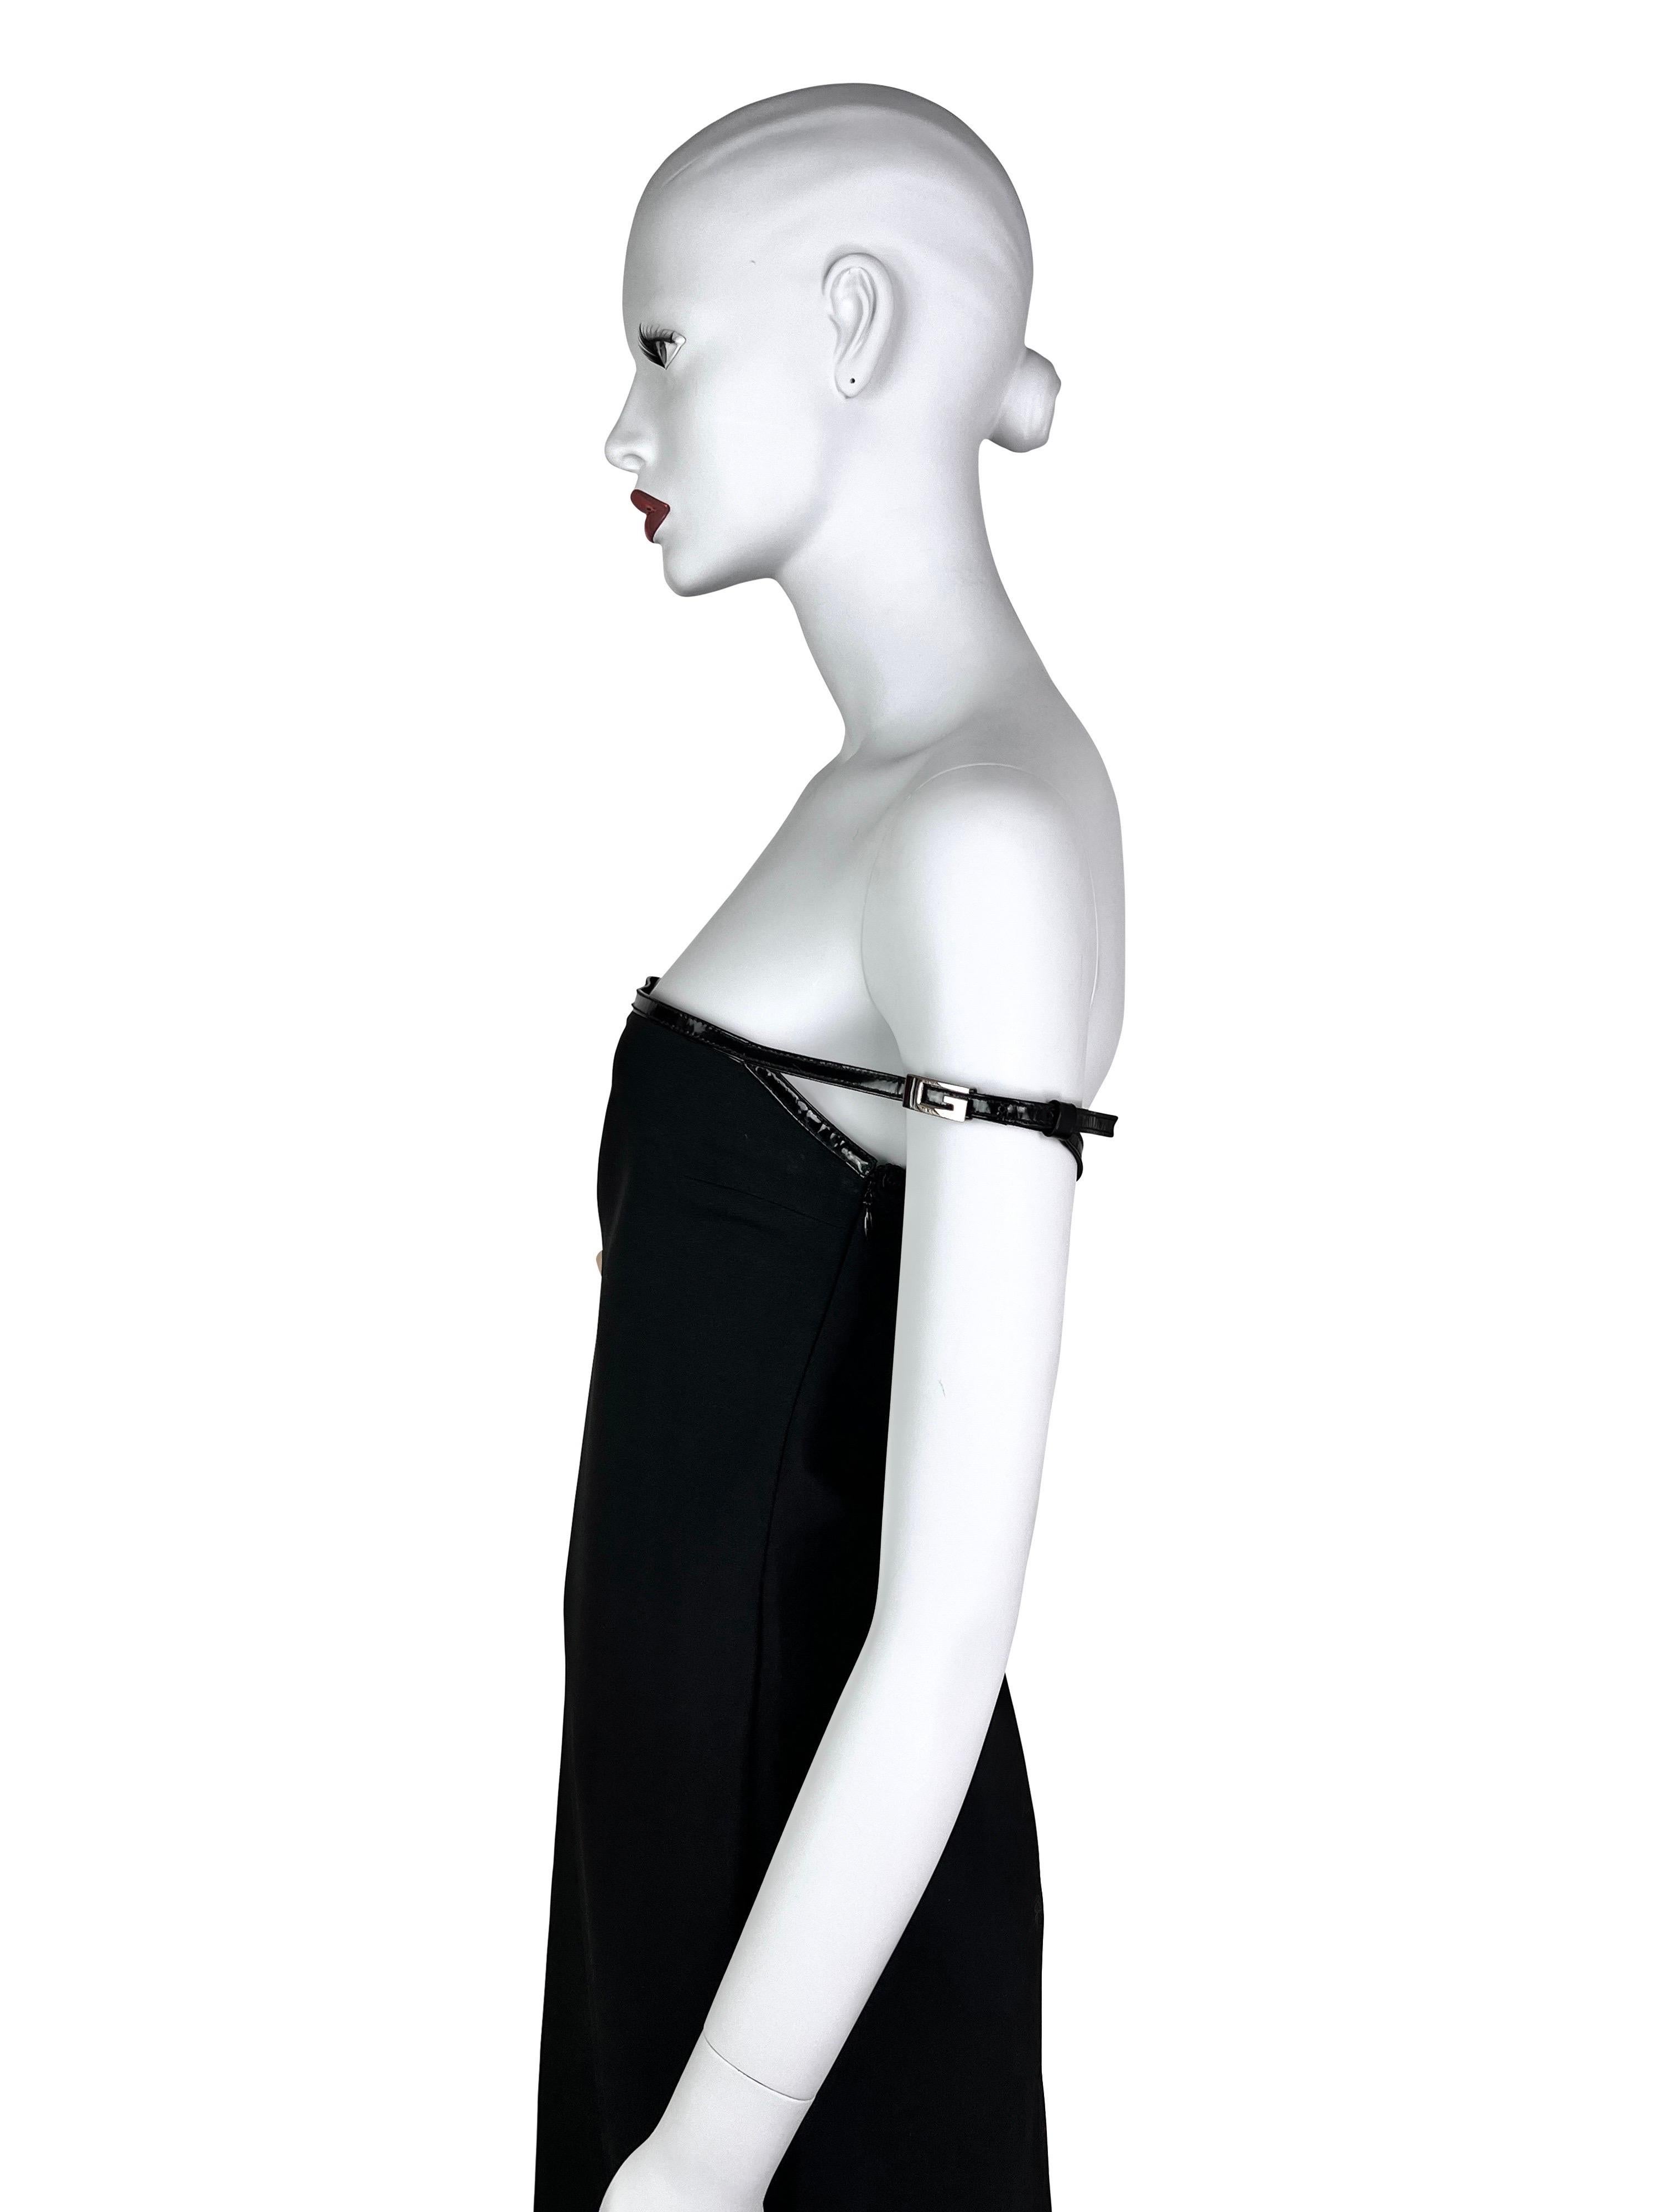 Gucci by Tom Ford Fall 1997 G-logo Strap Evening Black Dress For Sale 7